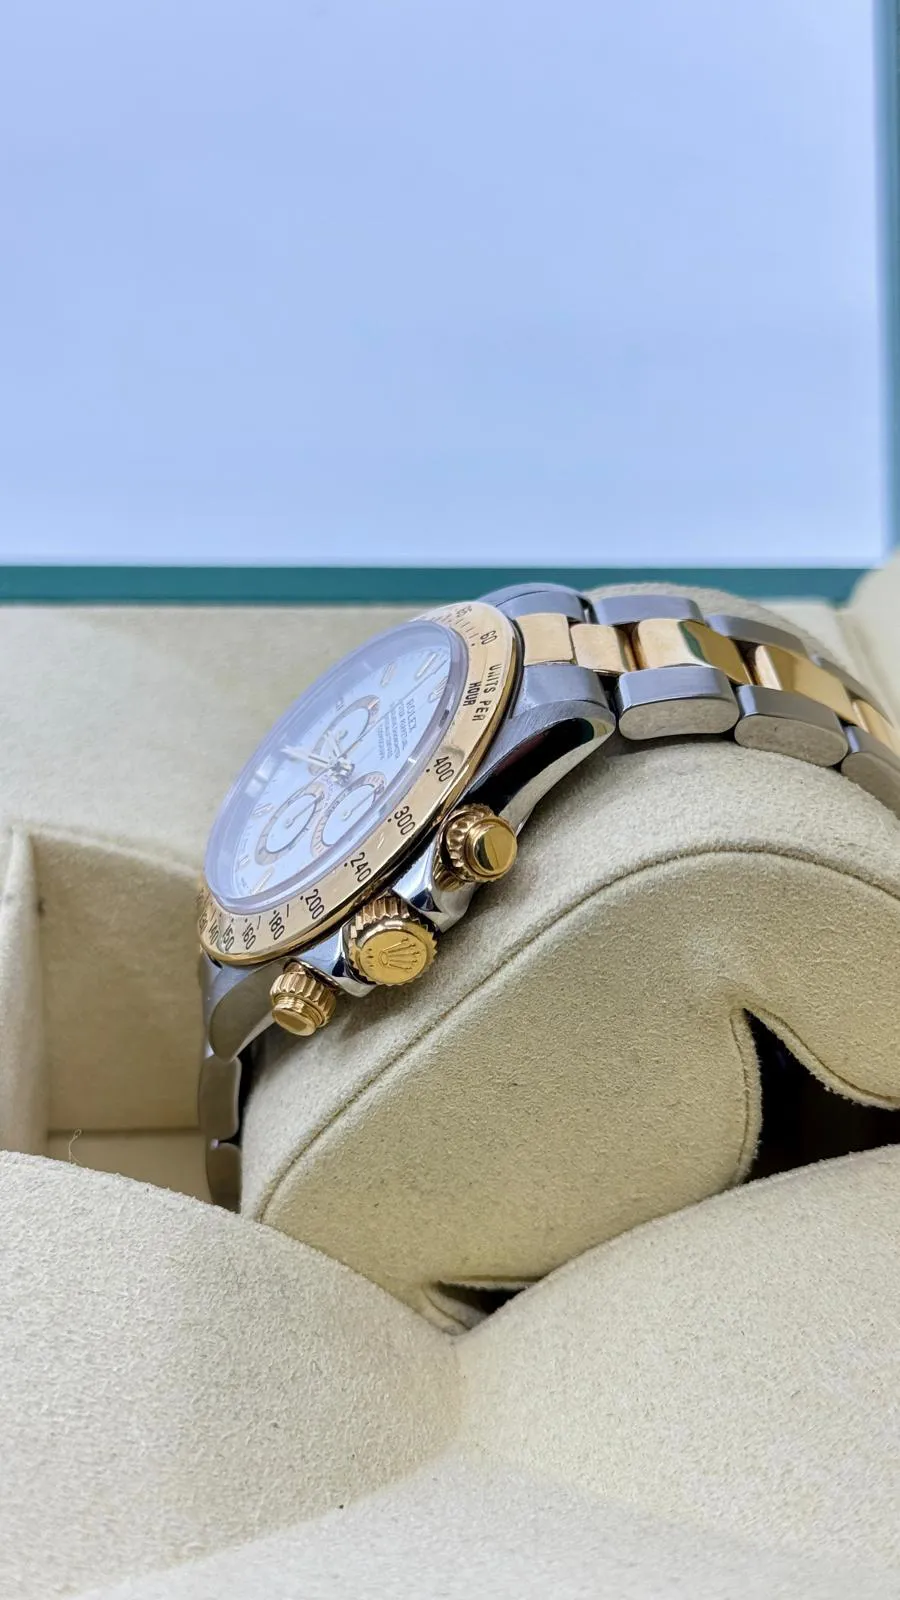 Rolex Daytona 16523 40mm Yellow gold and stainless steel 4